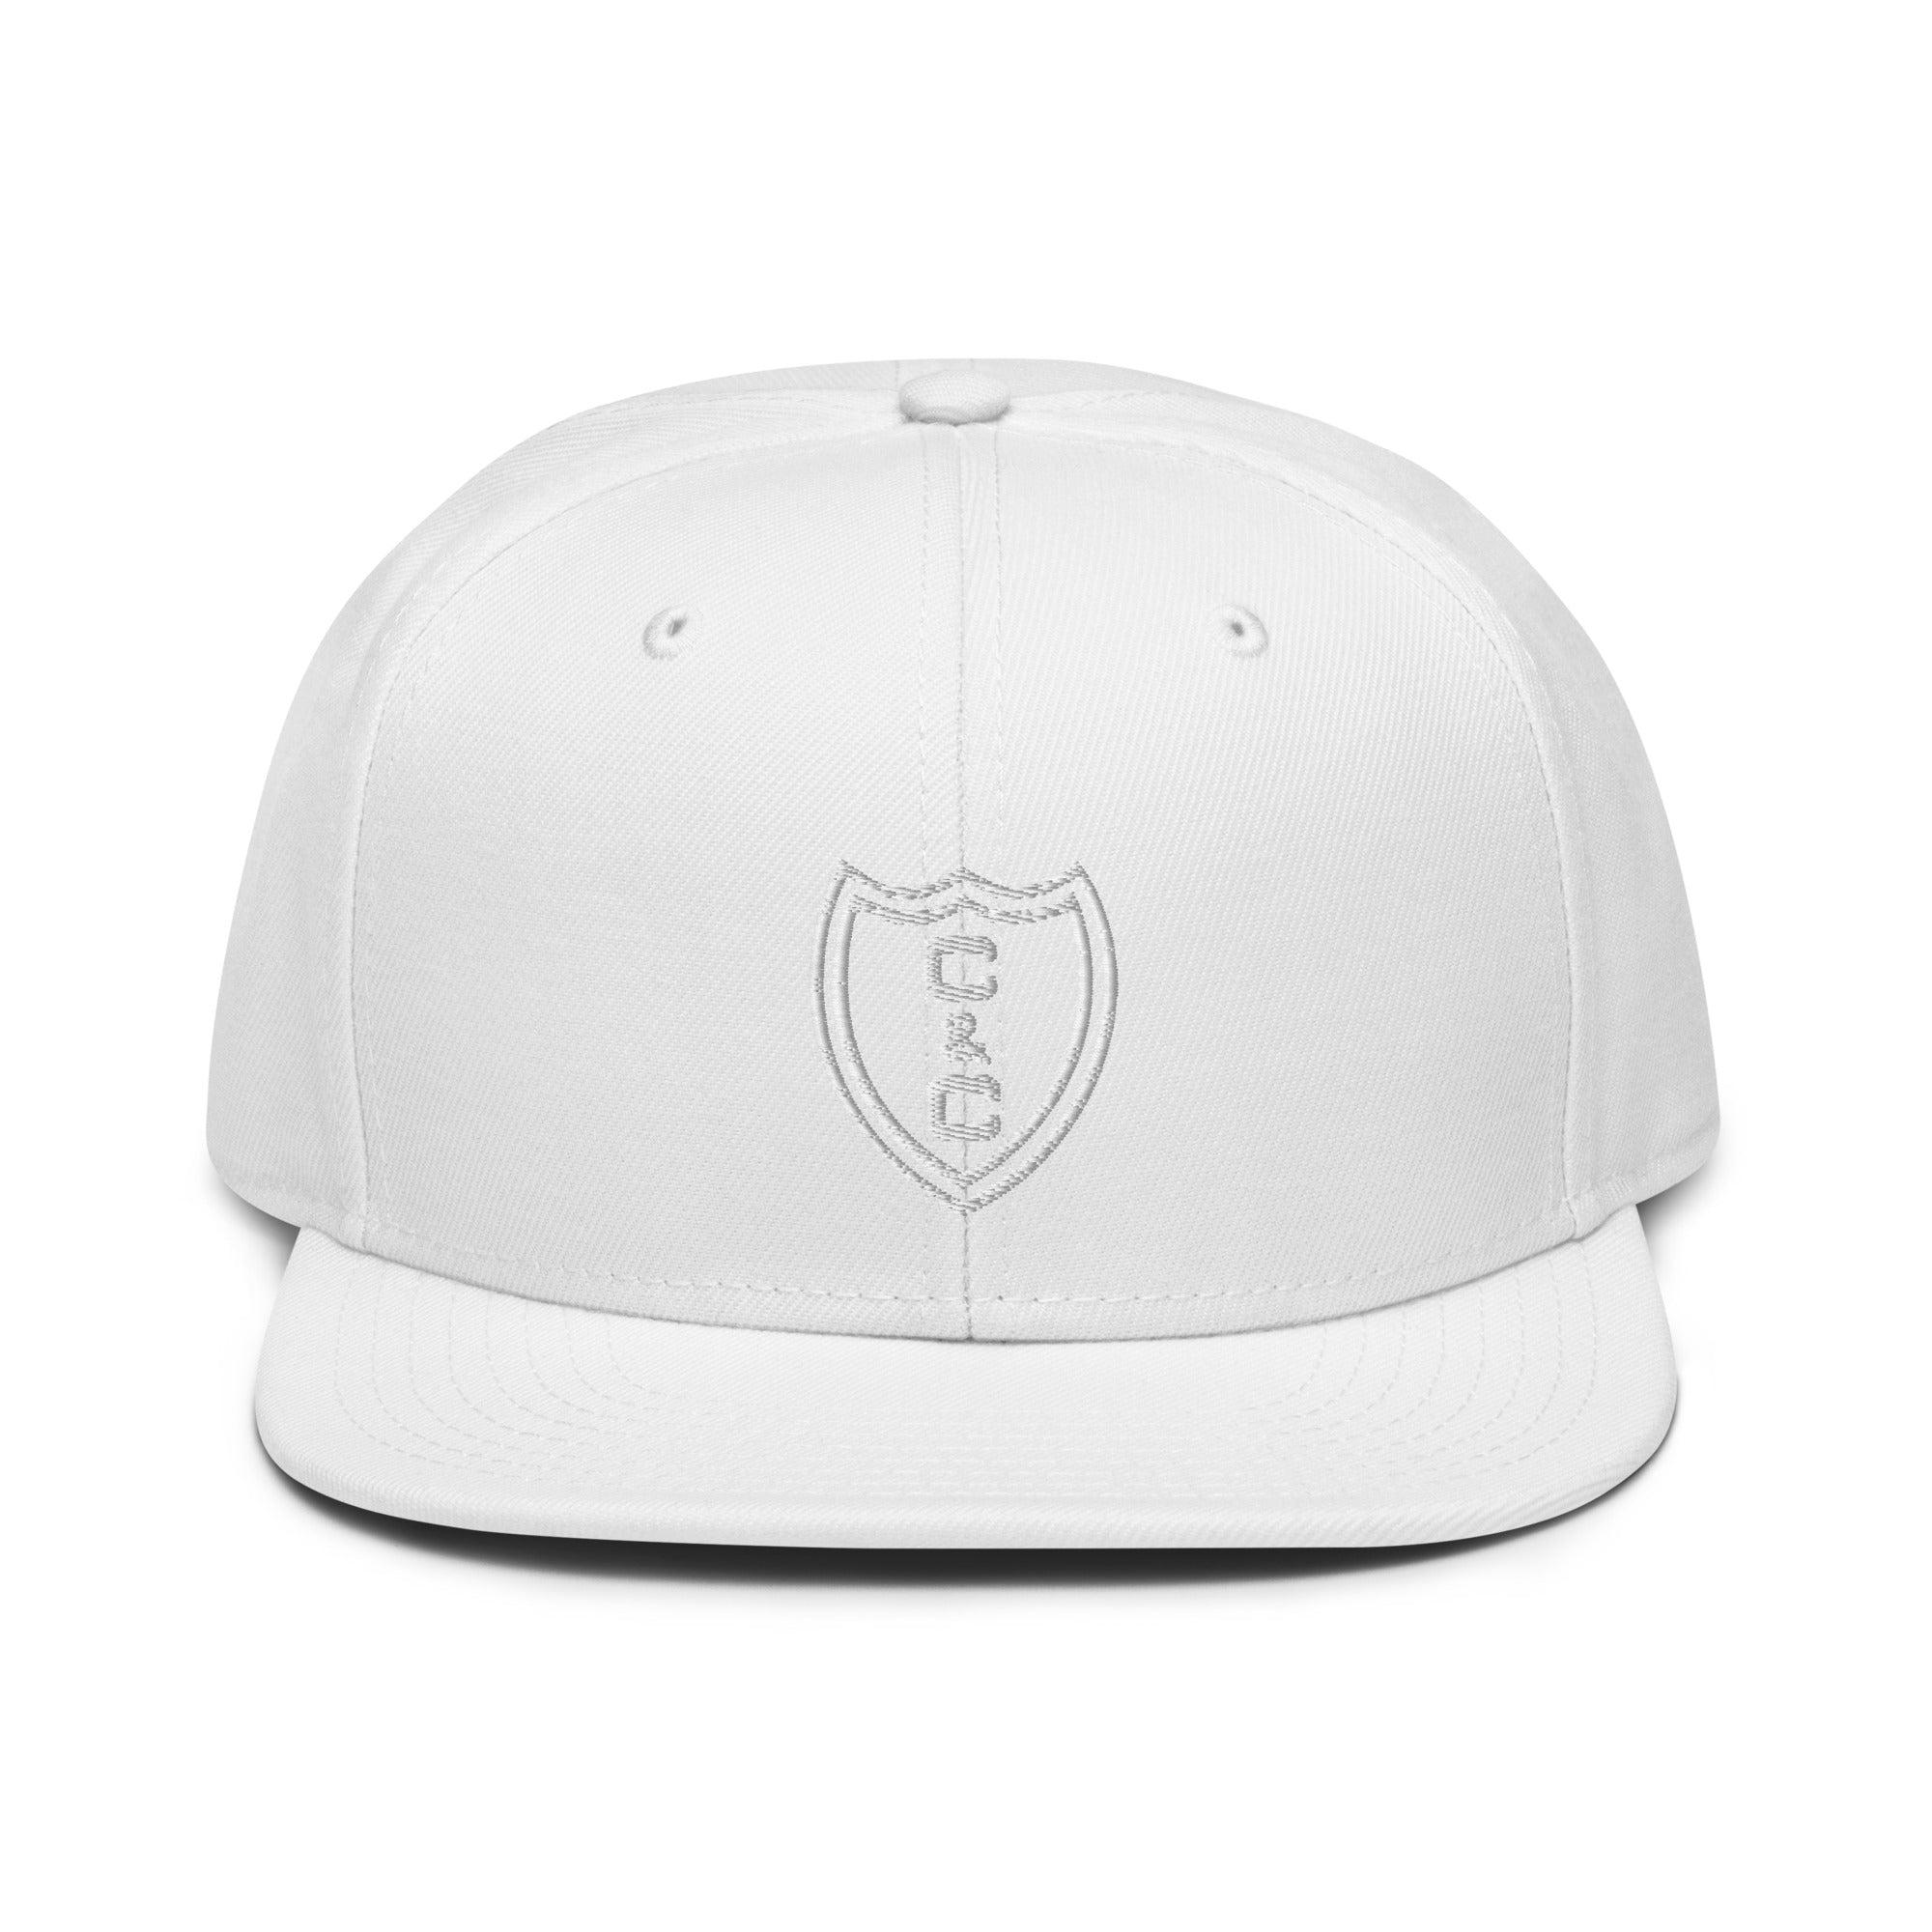 C&C Adult Snapback - White Embroidery (Multiple Color Options)